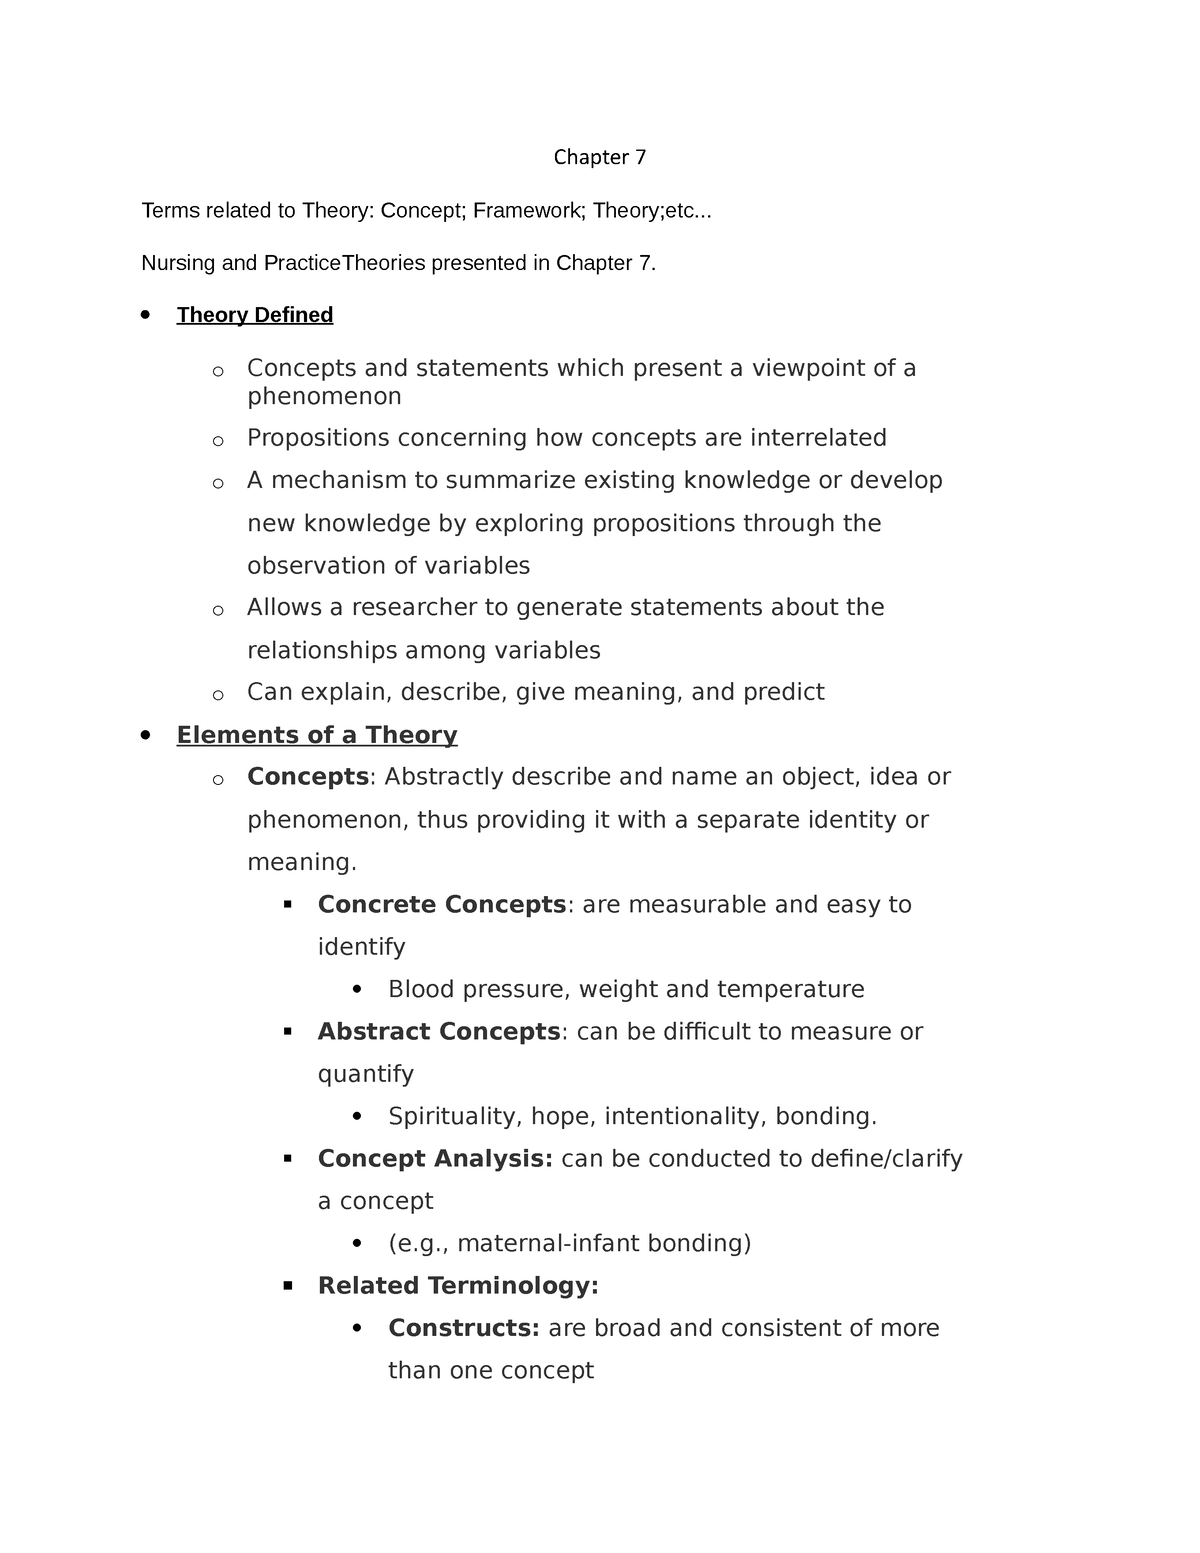 Theories and Framework Research Chapter 7 - Chapter 7 Terms related to ...